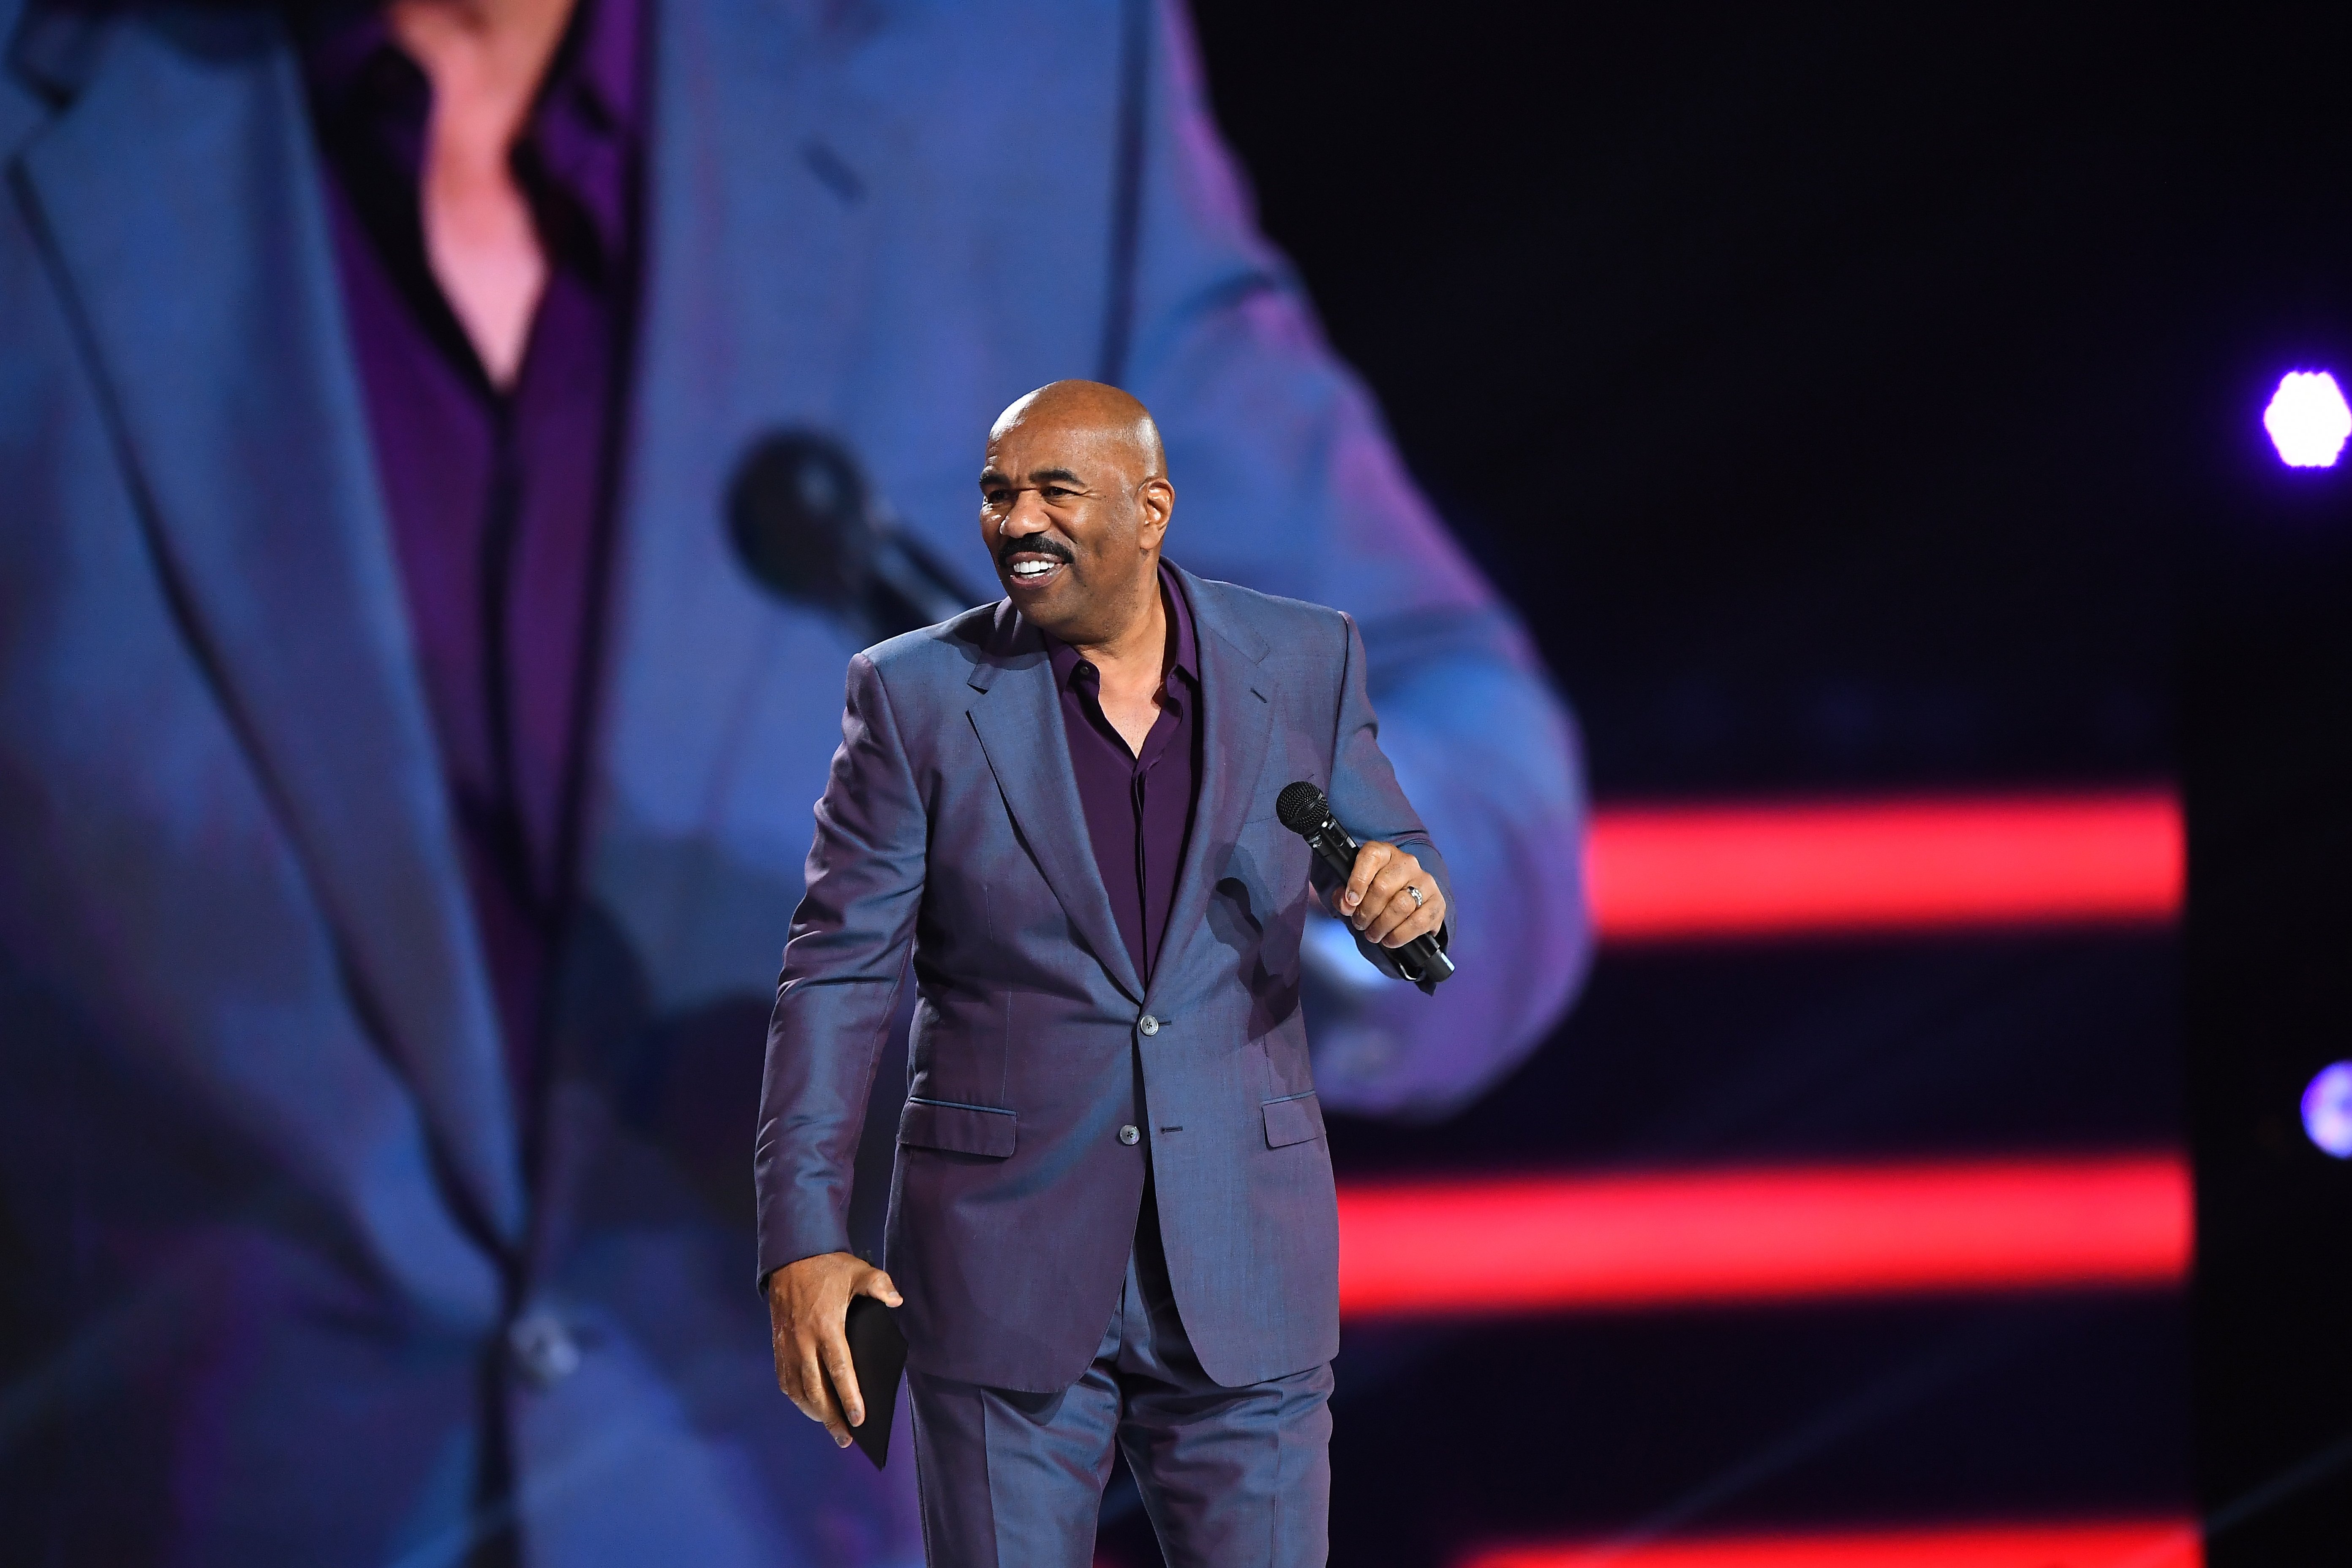 Steve Harvey speaks at the Beloved Benefit event in Atlanta, Georgia on March 21, 2019 | Photo: Getty Images